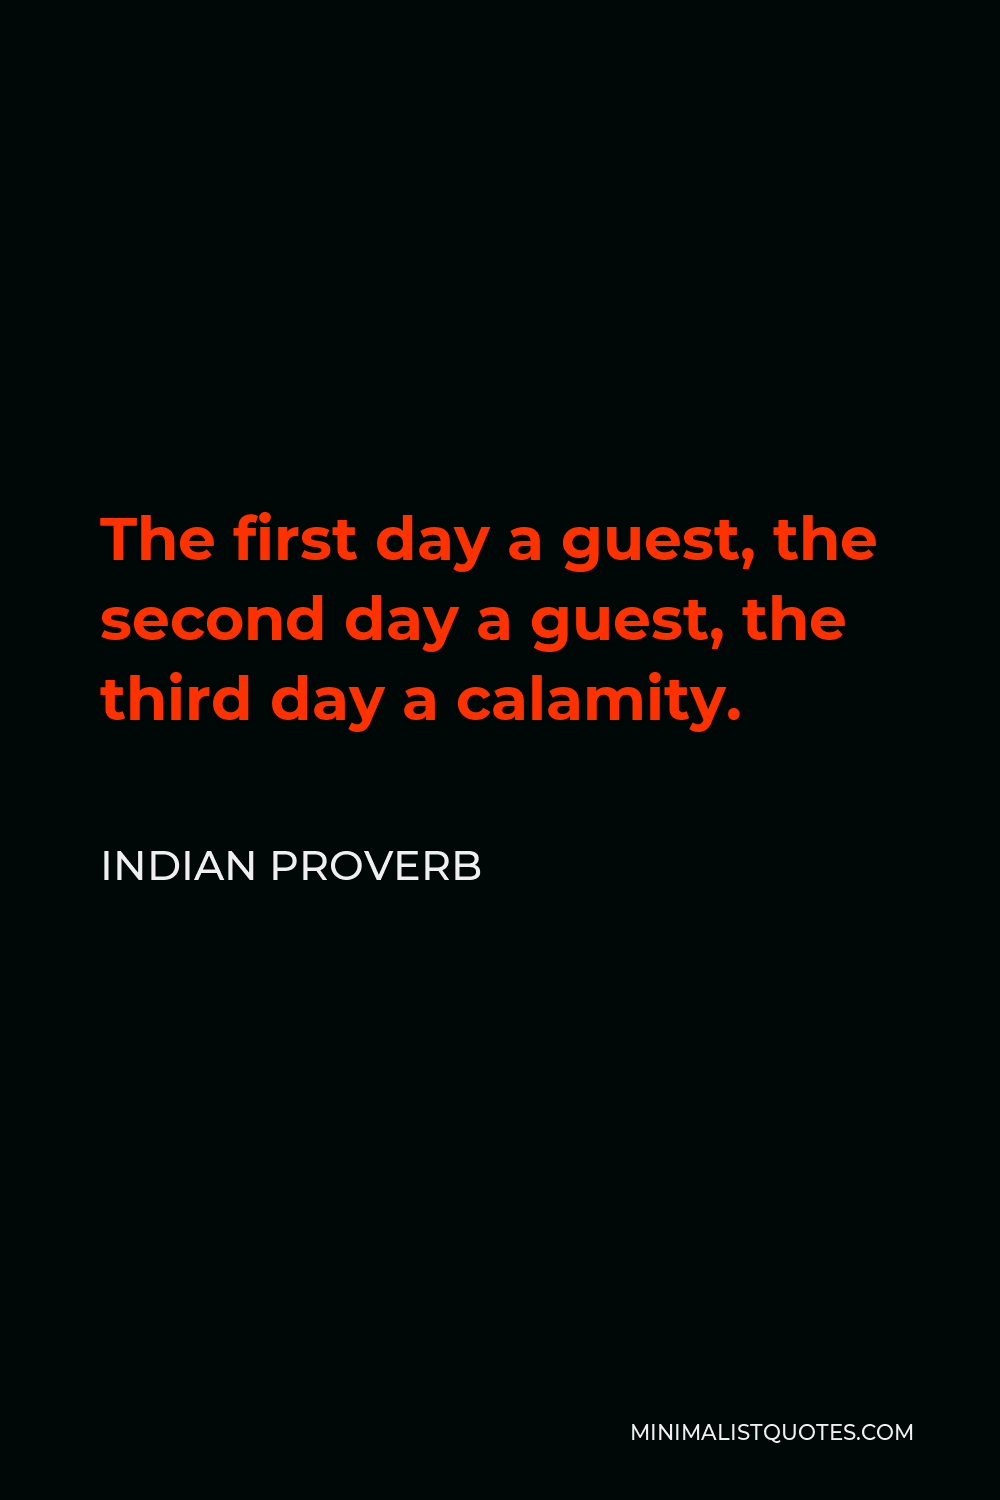 Indian Proverb Quote - The first day a guest, the second day a guest, the third day a calamity.